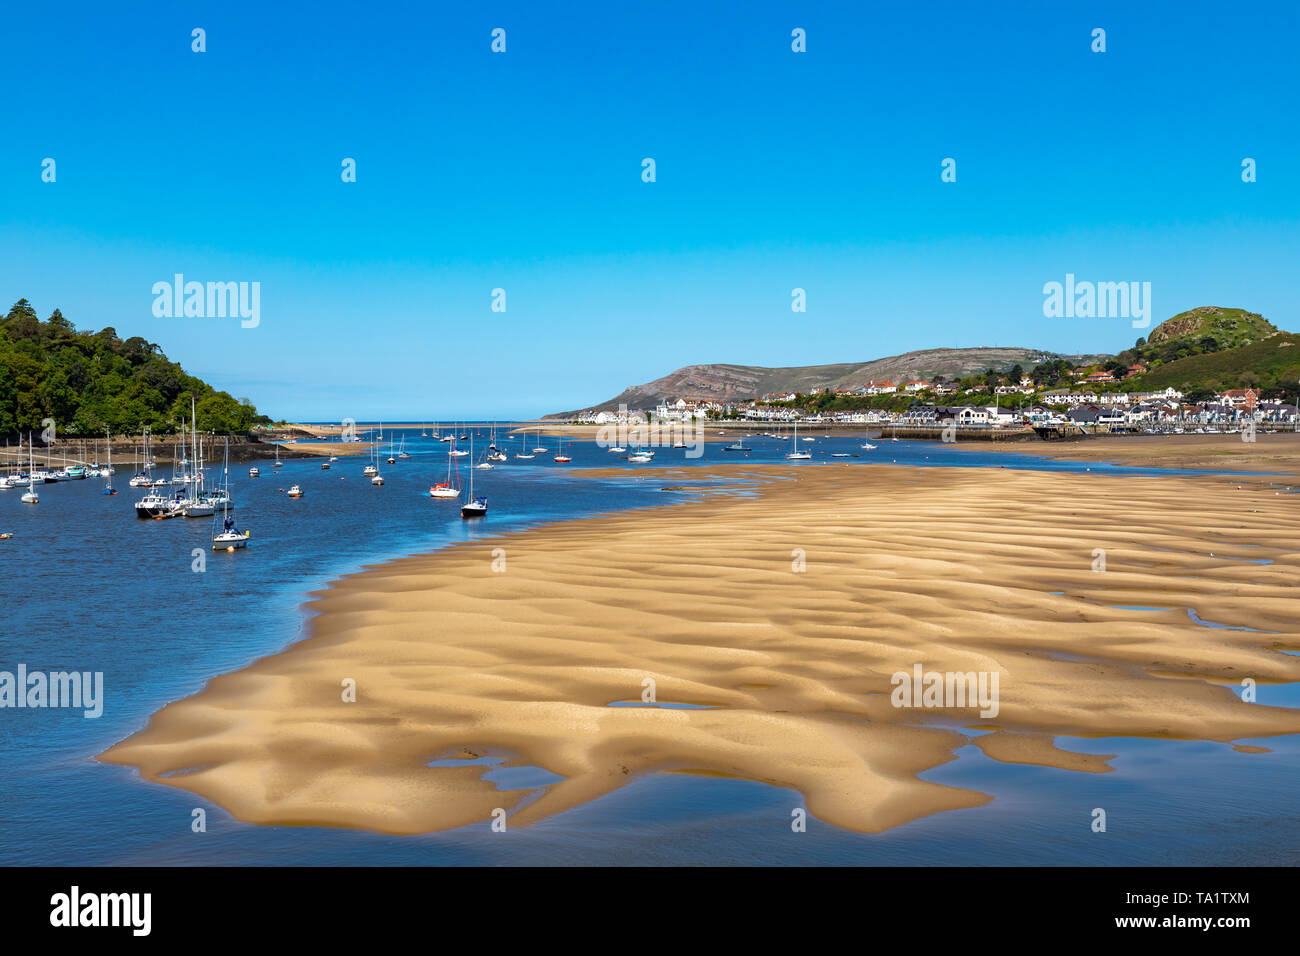 Conwy Wales die Mündung des Flusses Conwy bei Ebbe Mai 12, 2019 Stockfoto